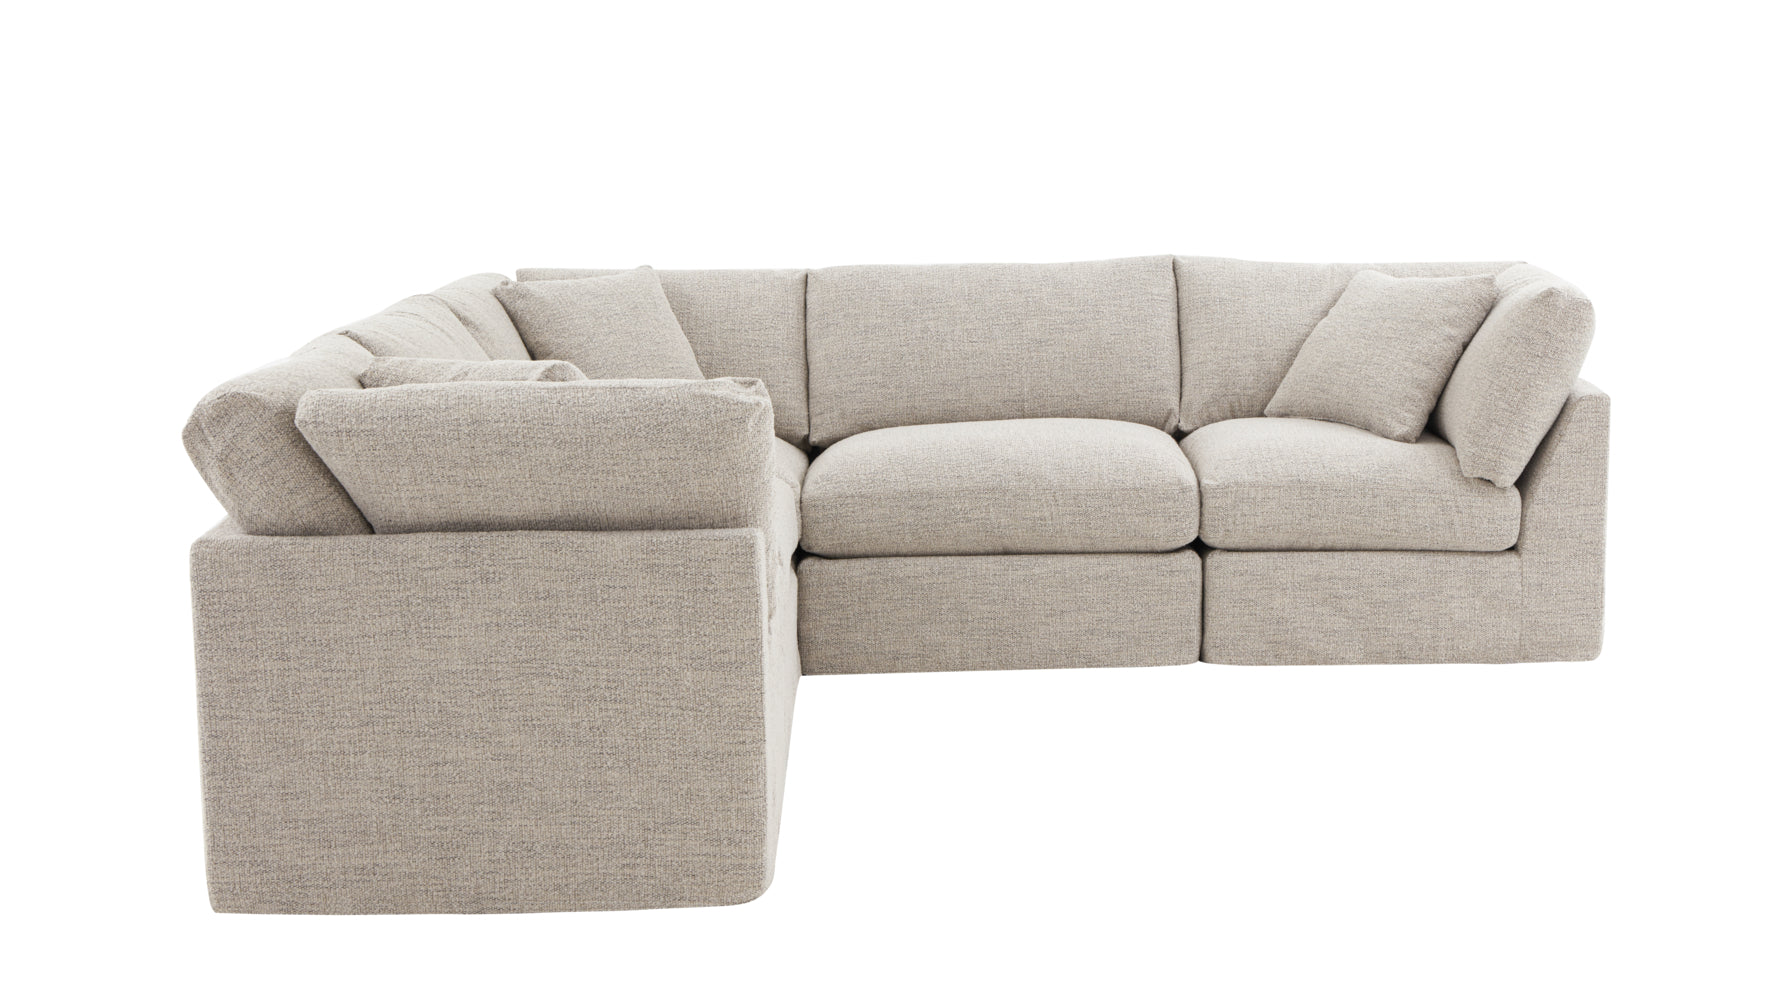 Get Together™ 5-Piece Modular Sectional Closed, Standard, Oatmeal - Image 5